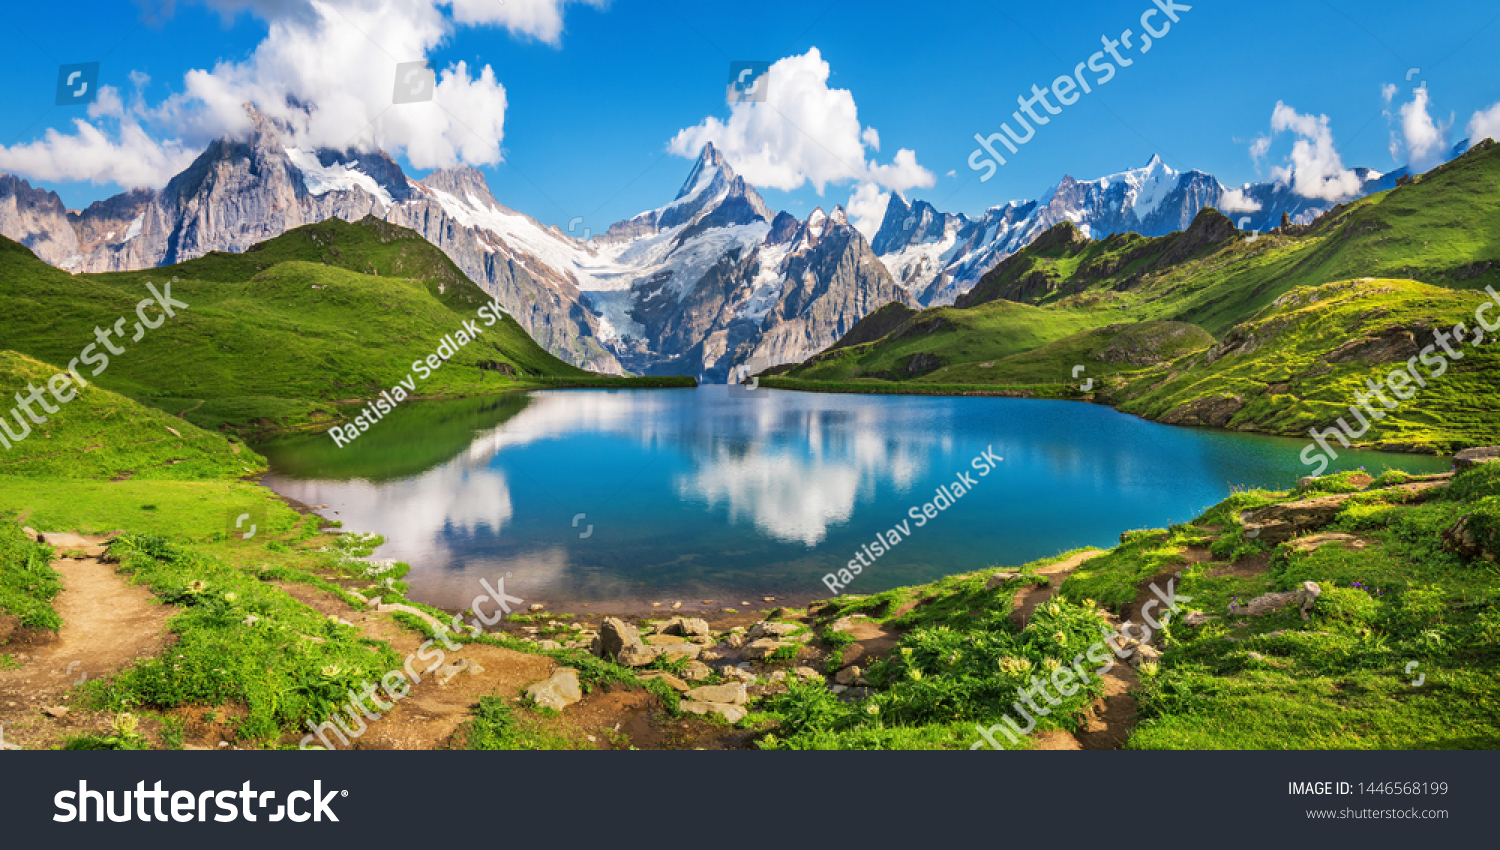 Sunrise  view on Bernese range above Bachalpsee lake. Popular tourist attraction. Location place Swiss alps, Grindelwald valley, Europe.  #1446568199